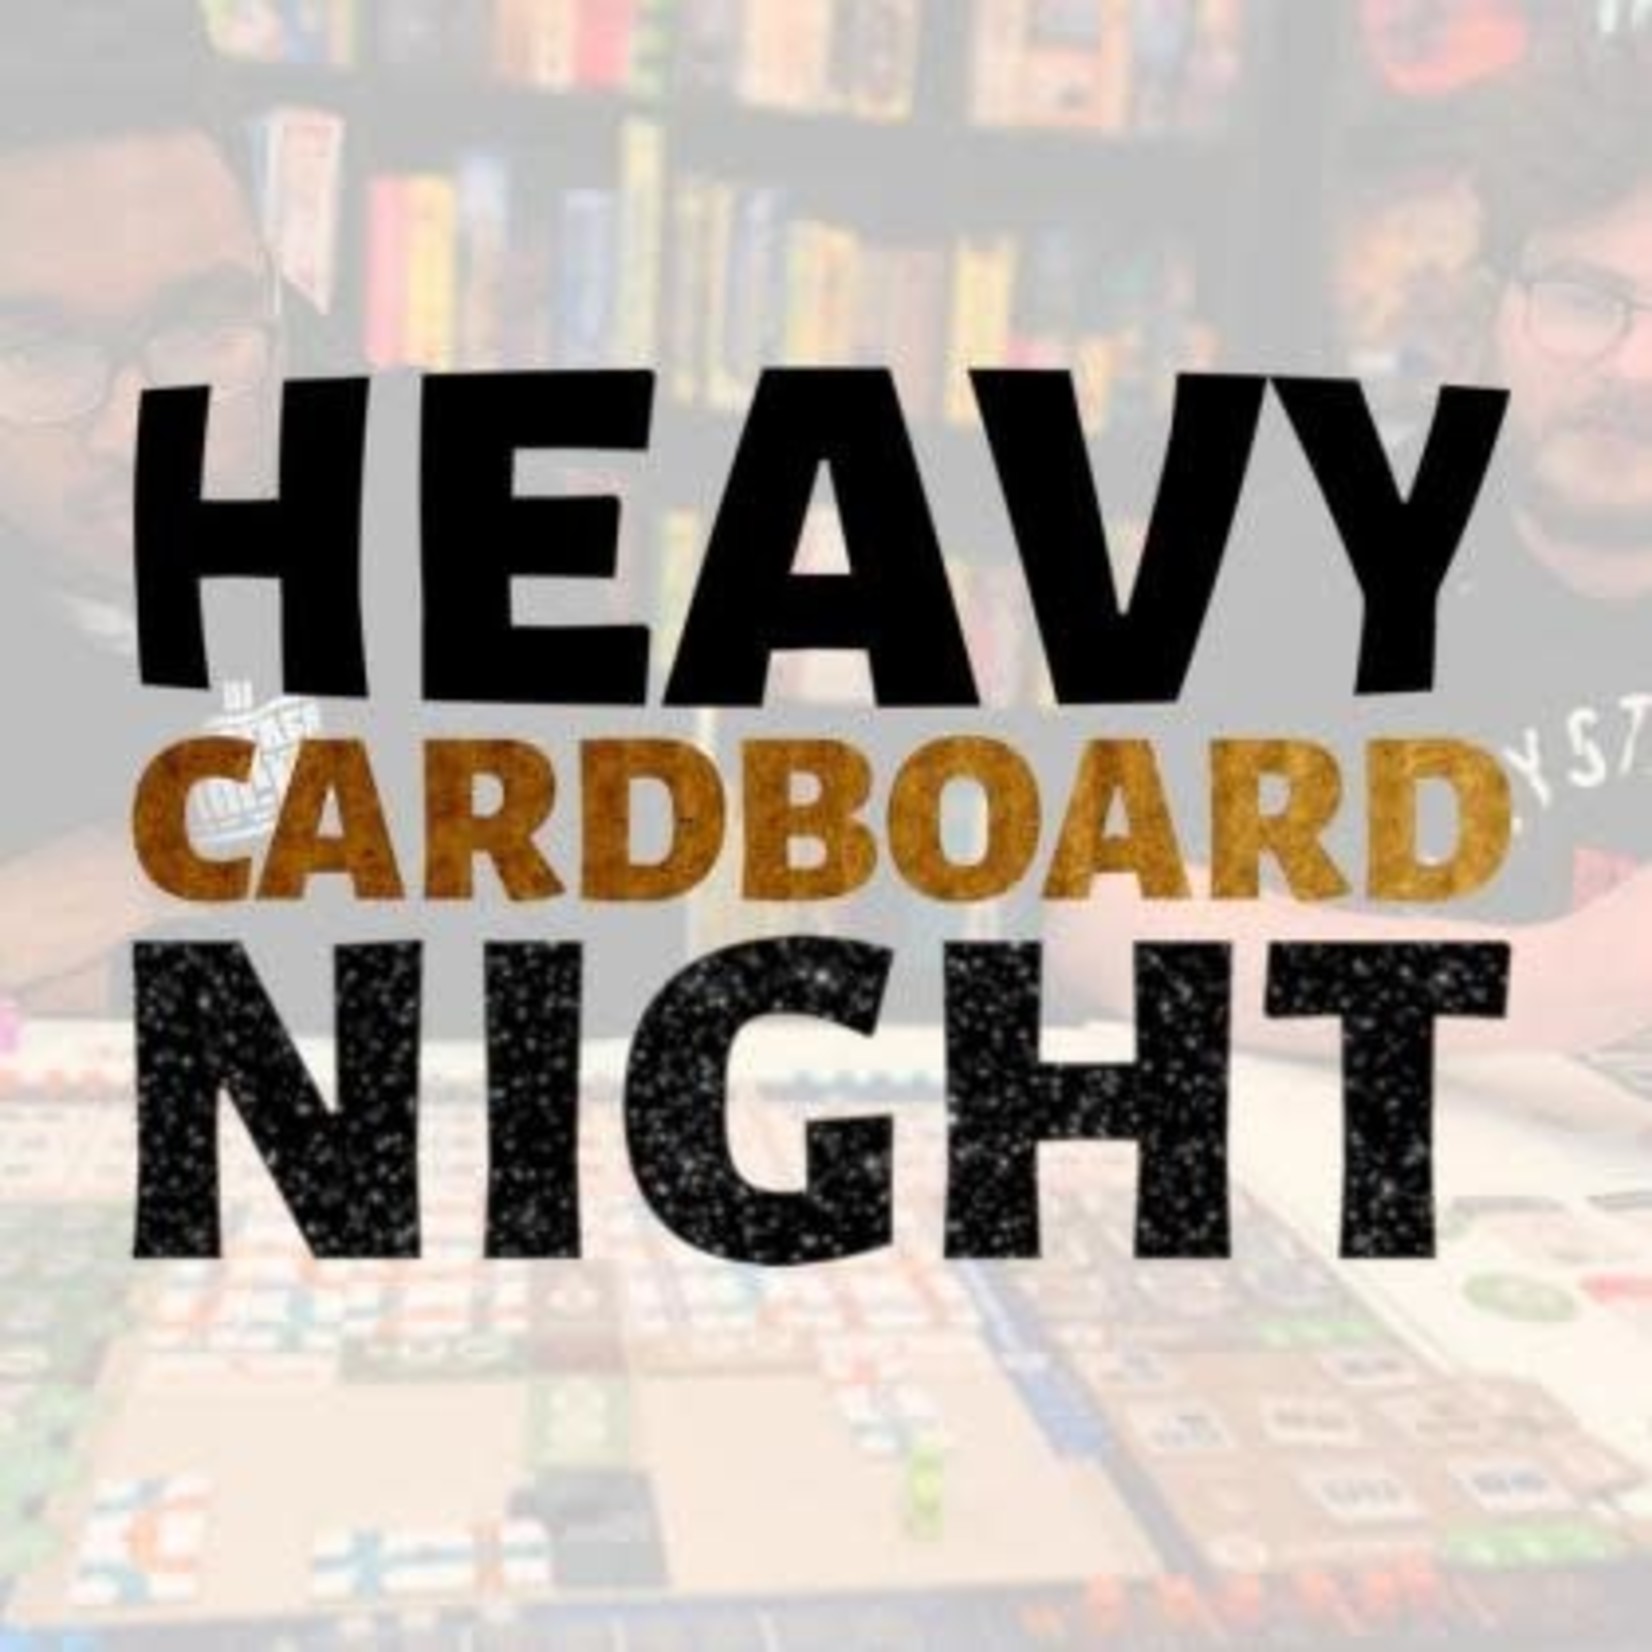 Admission: Heavy Cardboard Board Gaming Night (March 18, Downers Grove)